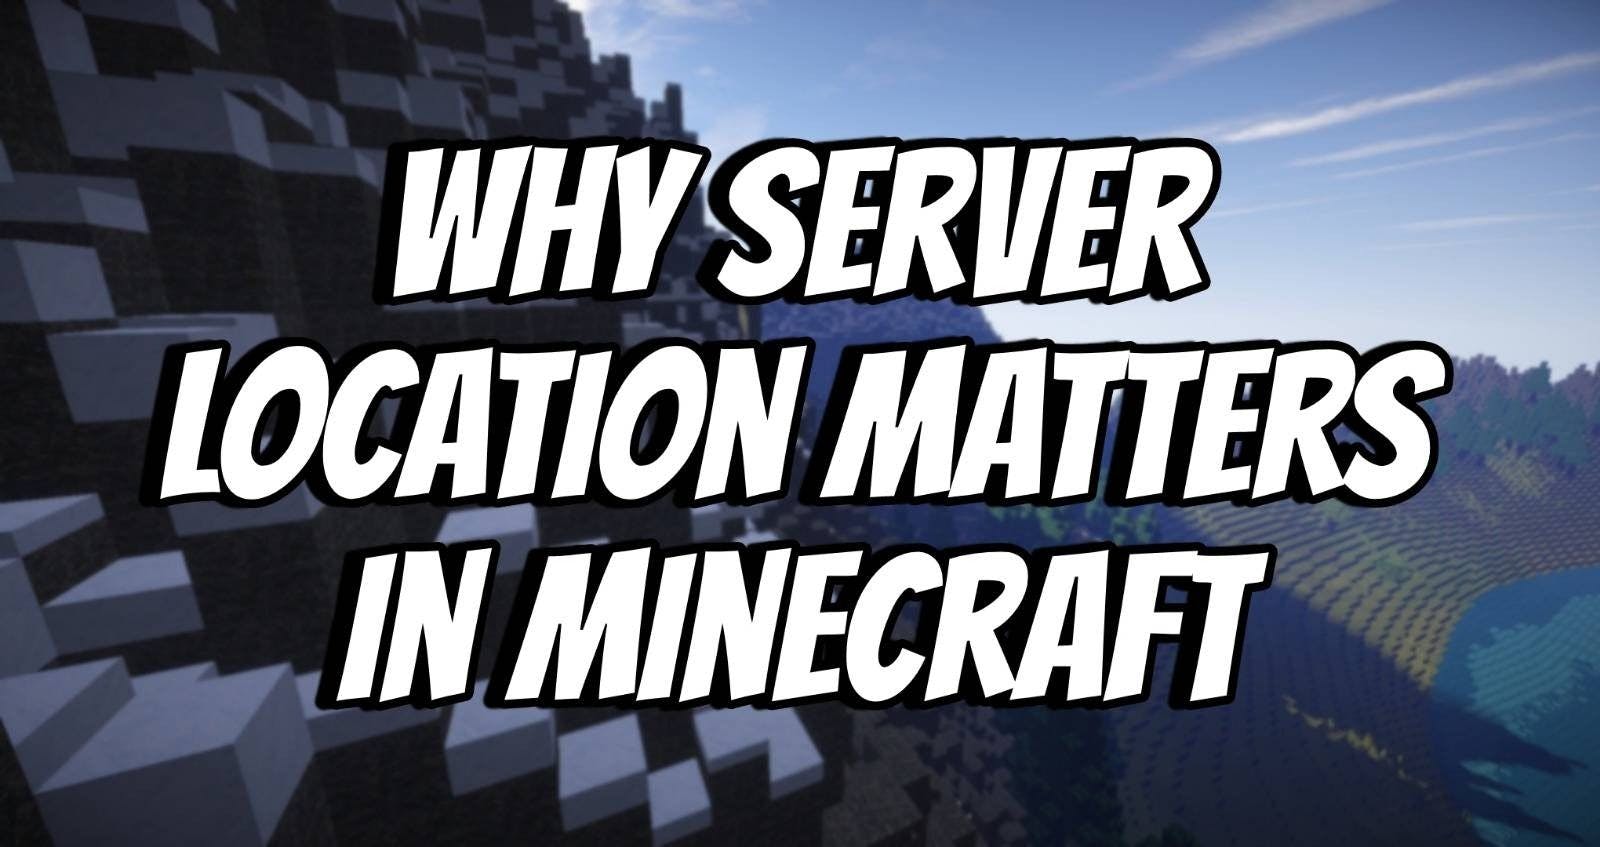 Featured Image - Why Server location matters in Minecraft